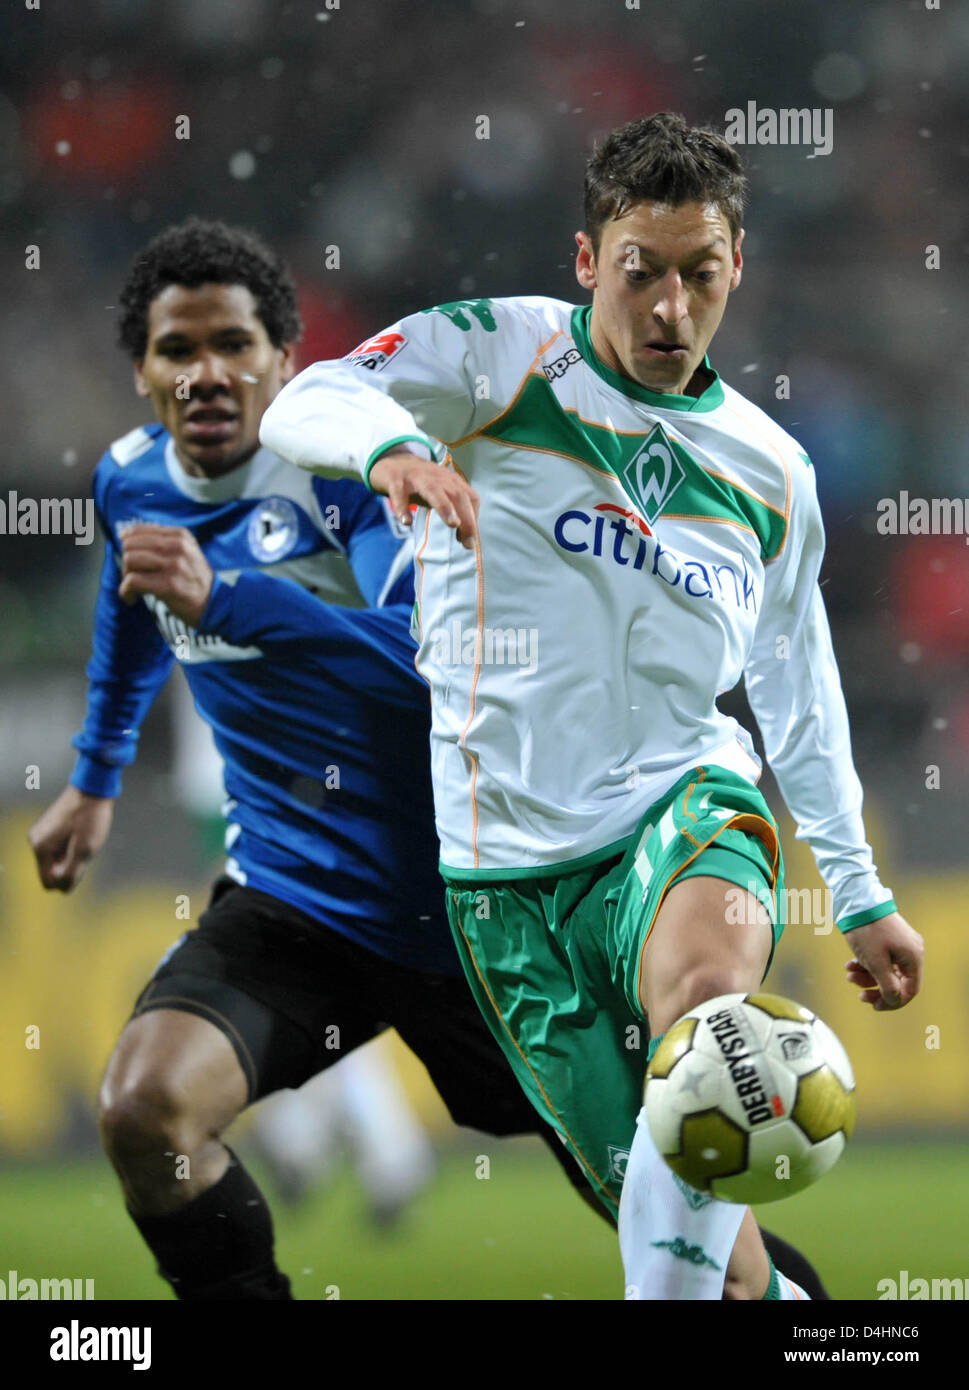 Bremen?s Mesut Oezil (front) fights for the ball with Bielefeld?s Michael Lamey during the Bundesliga match Werder Bremen vs Arminia Bielefeld at Weser stadium in Bremen, Germany, 01 February 2009. Bielefeld defeated Bremen 2-1. Photo: CARMEN JASPERSEN (ATTENTION: BLOCKING PERIOD! The DFL permits the further utilisation of the pictures in IPTV, mobile services and other new technol Stock Photo